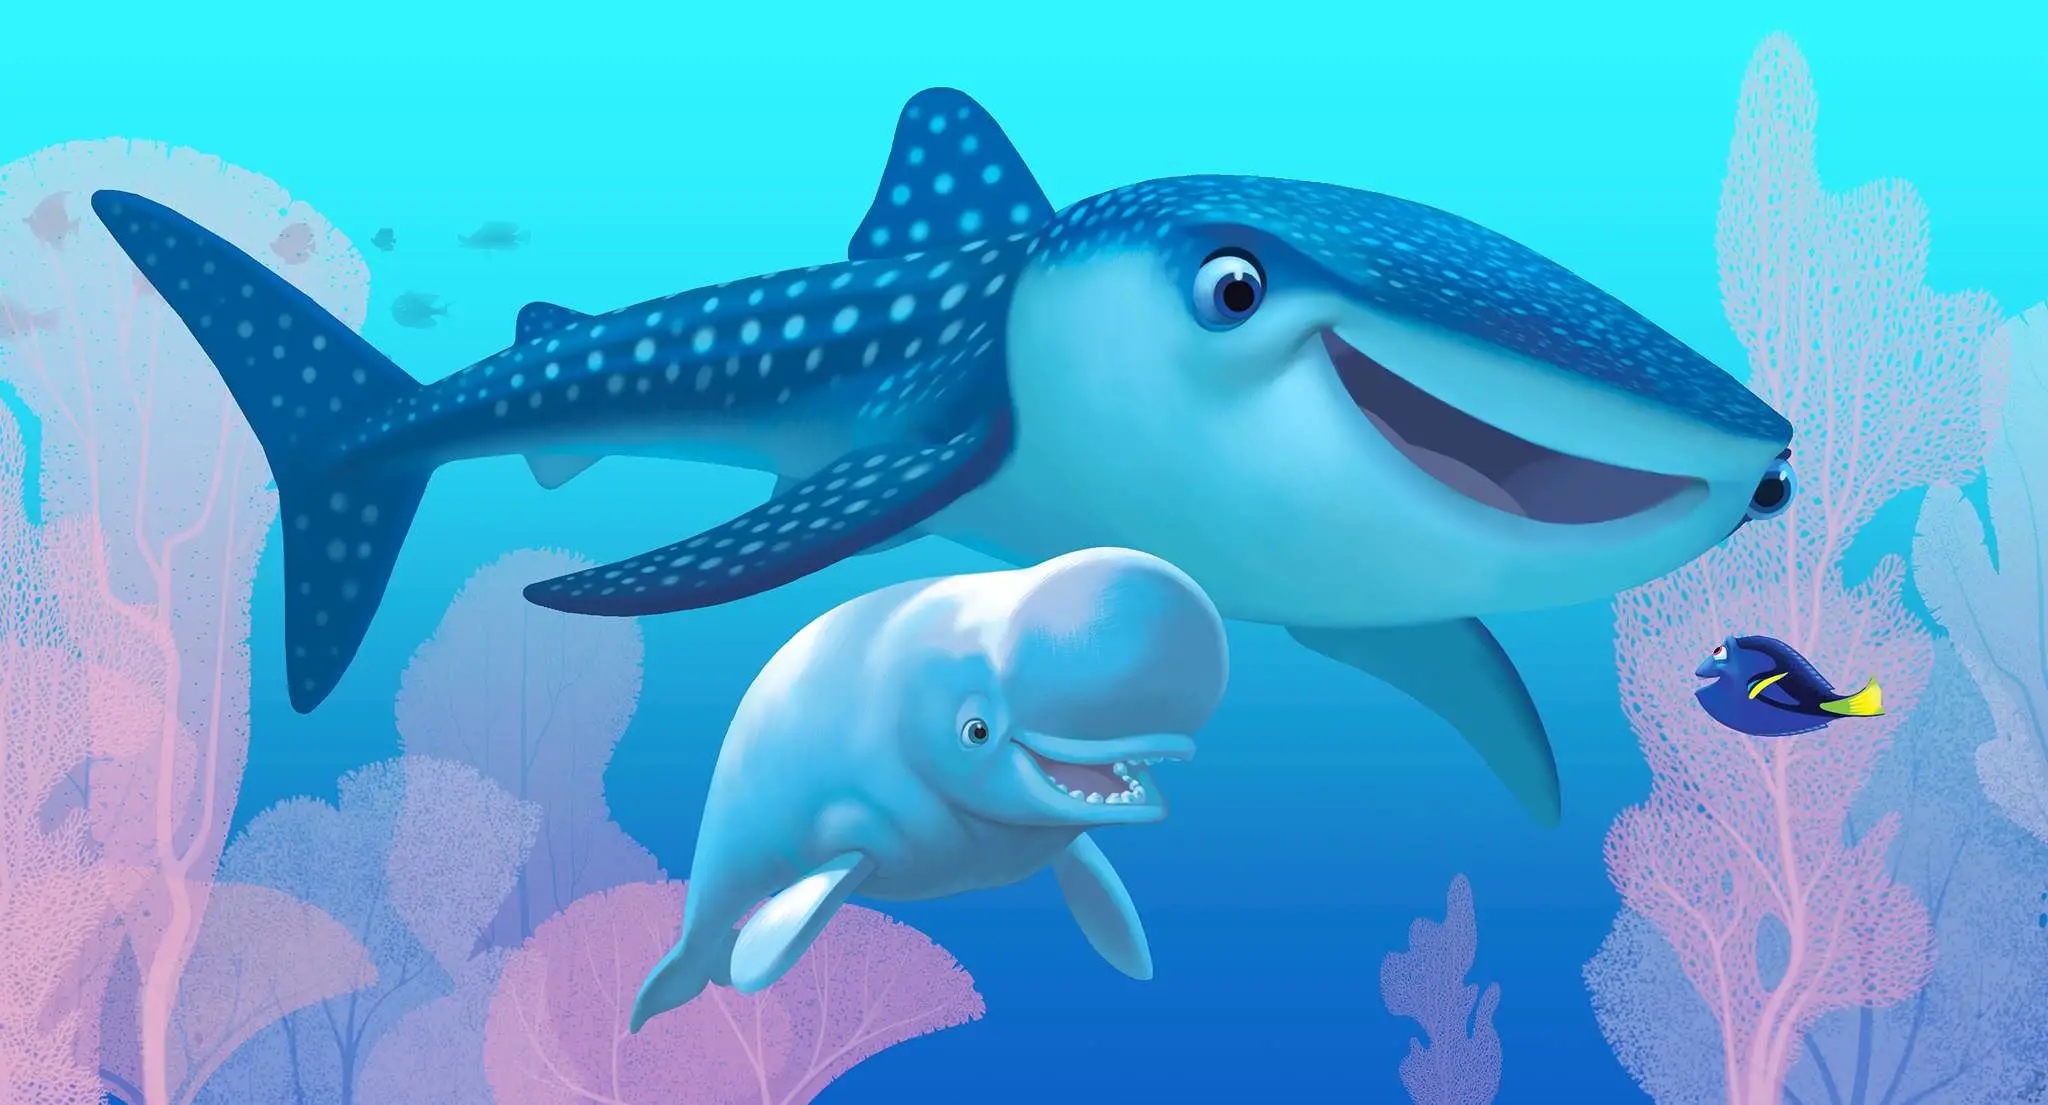 pixar-introduces-two-new-finding-dory-characters-swim-the-friendly-seas-with-bailey-and-d-771999